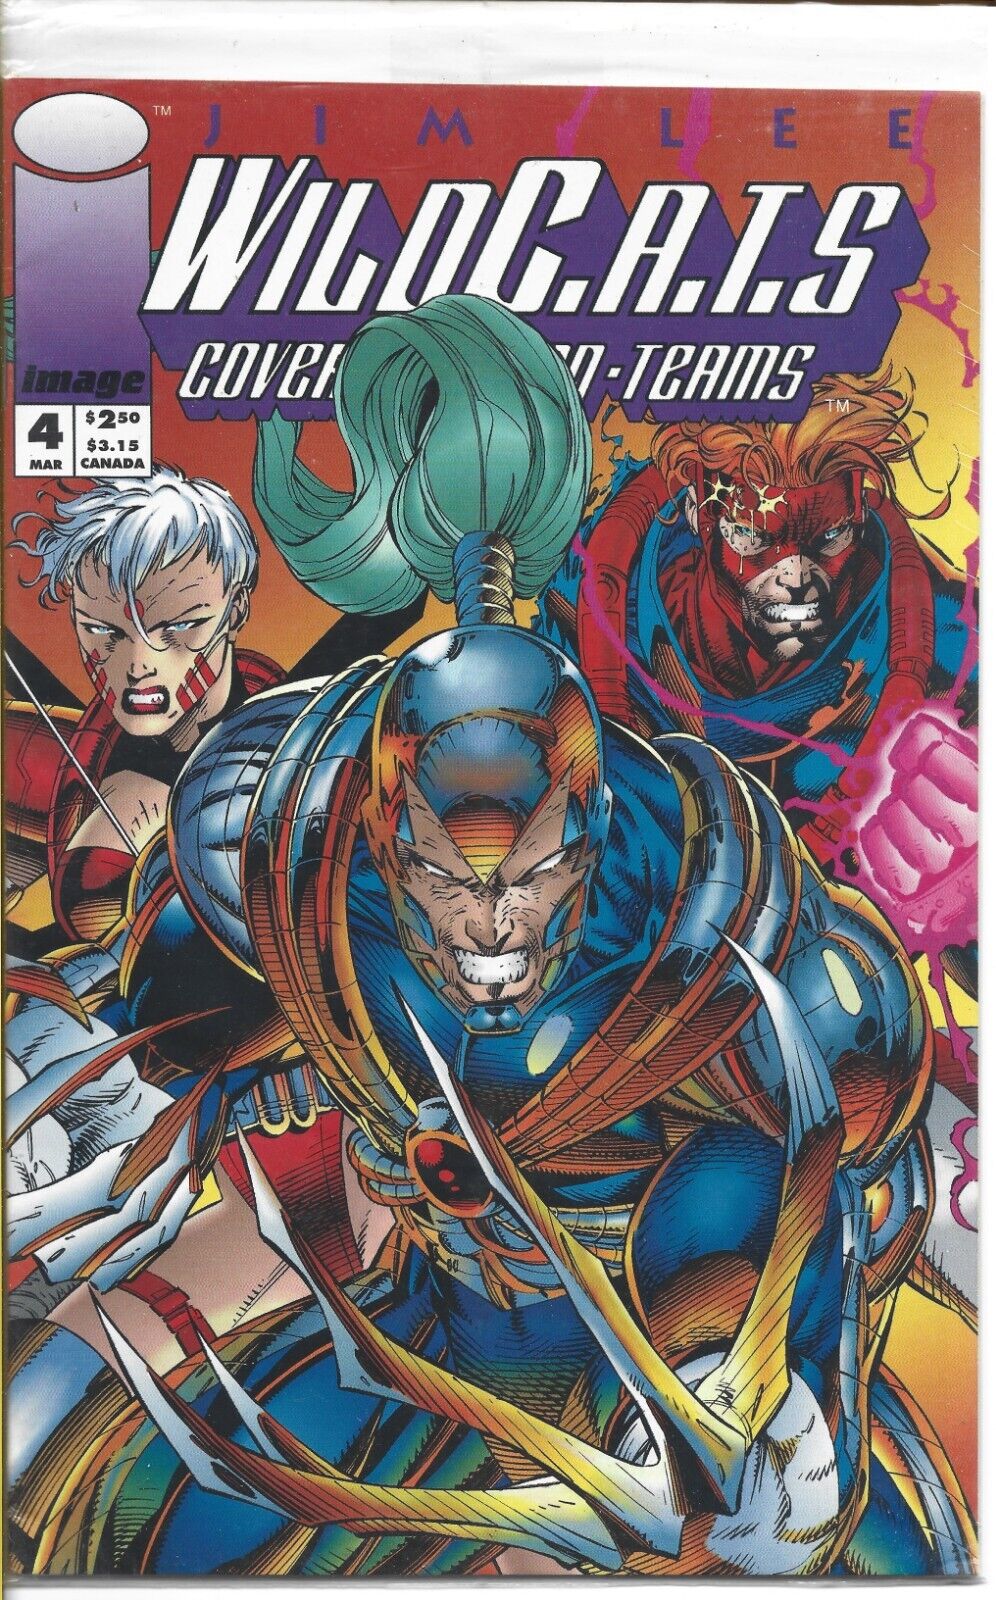 WILDC.A.T.S: COVERT ACTION TEAM #4 IMAGE 1993 BAGGED AND BOARDED